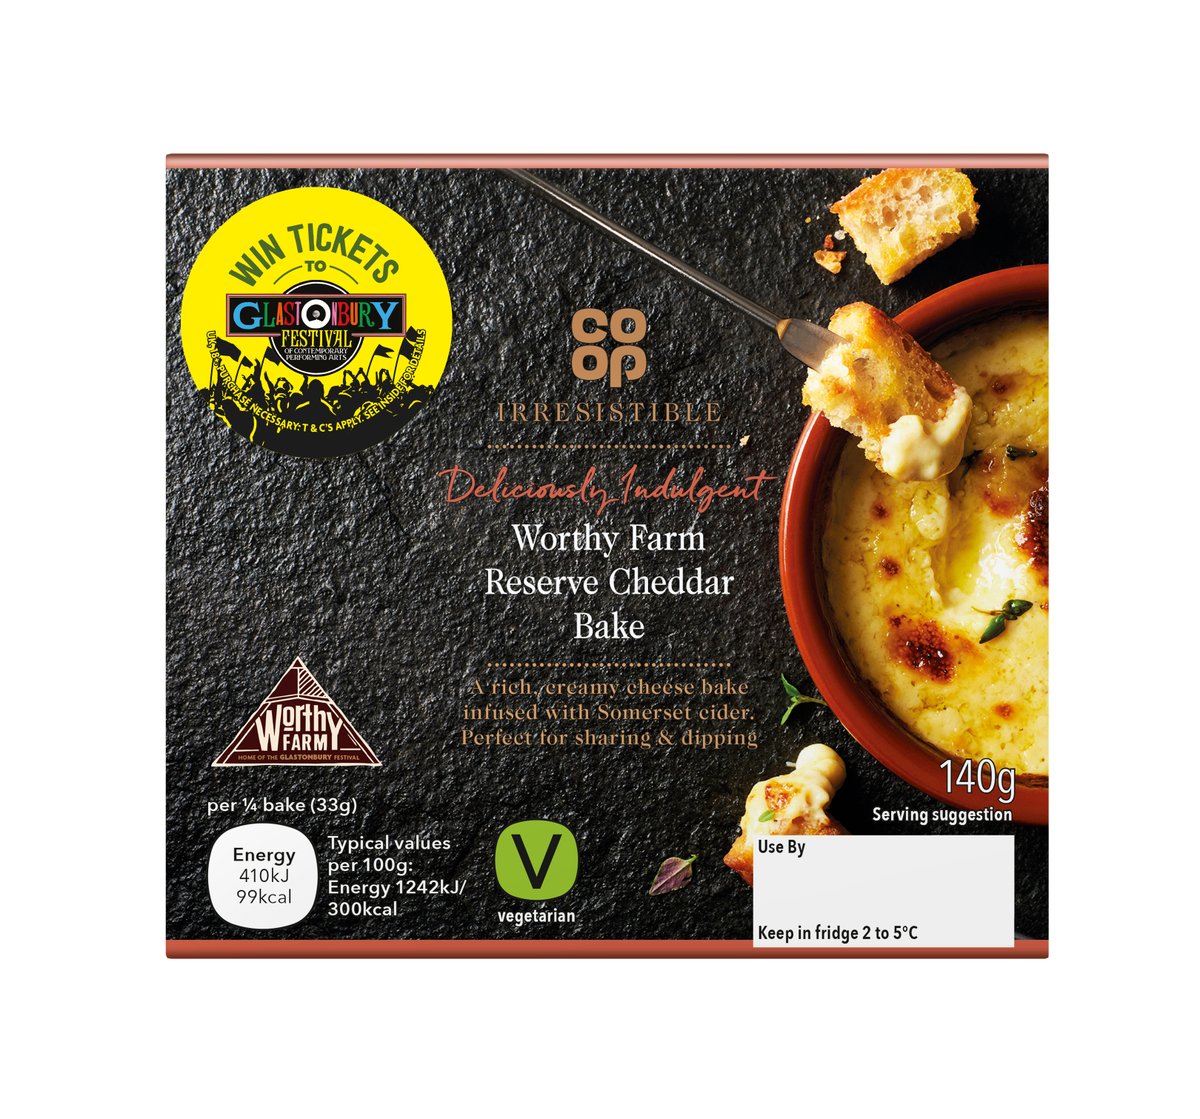 We are excited to announce the new Co-op Irresistible Worthy Farm Reserve Cheddar Bake! This Cheddar Bake is the perfect treat for you to enjoy this weekend! Rich, creamy and infused with Somerset cider - what’s not to love? Available @coopuk now. Get your loaf ready and tuck in!